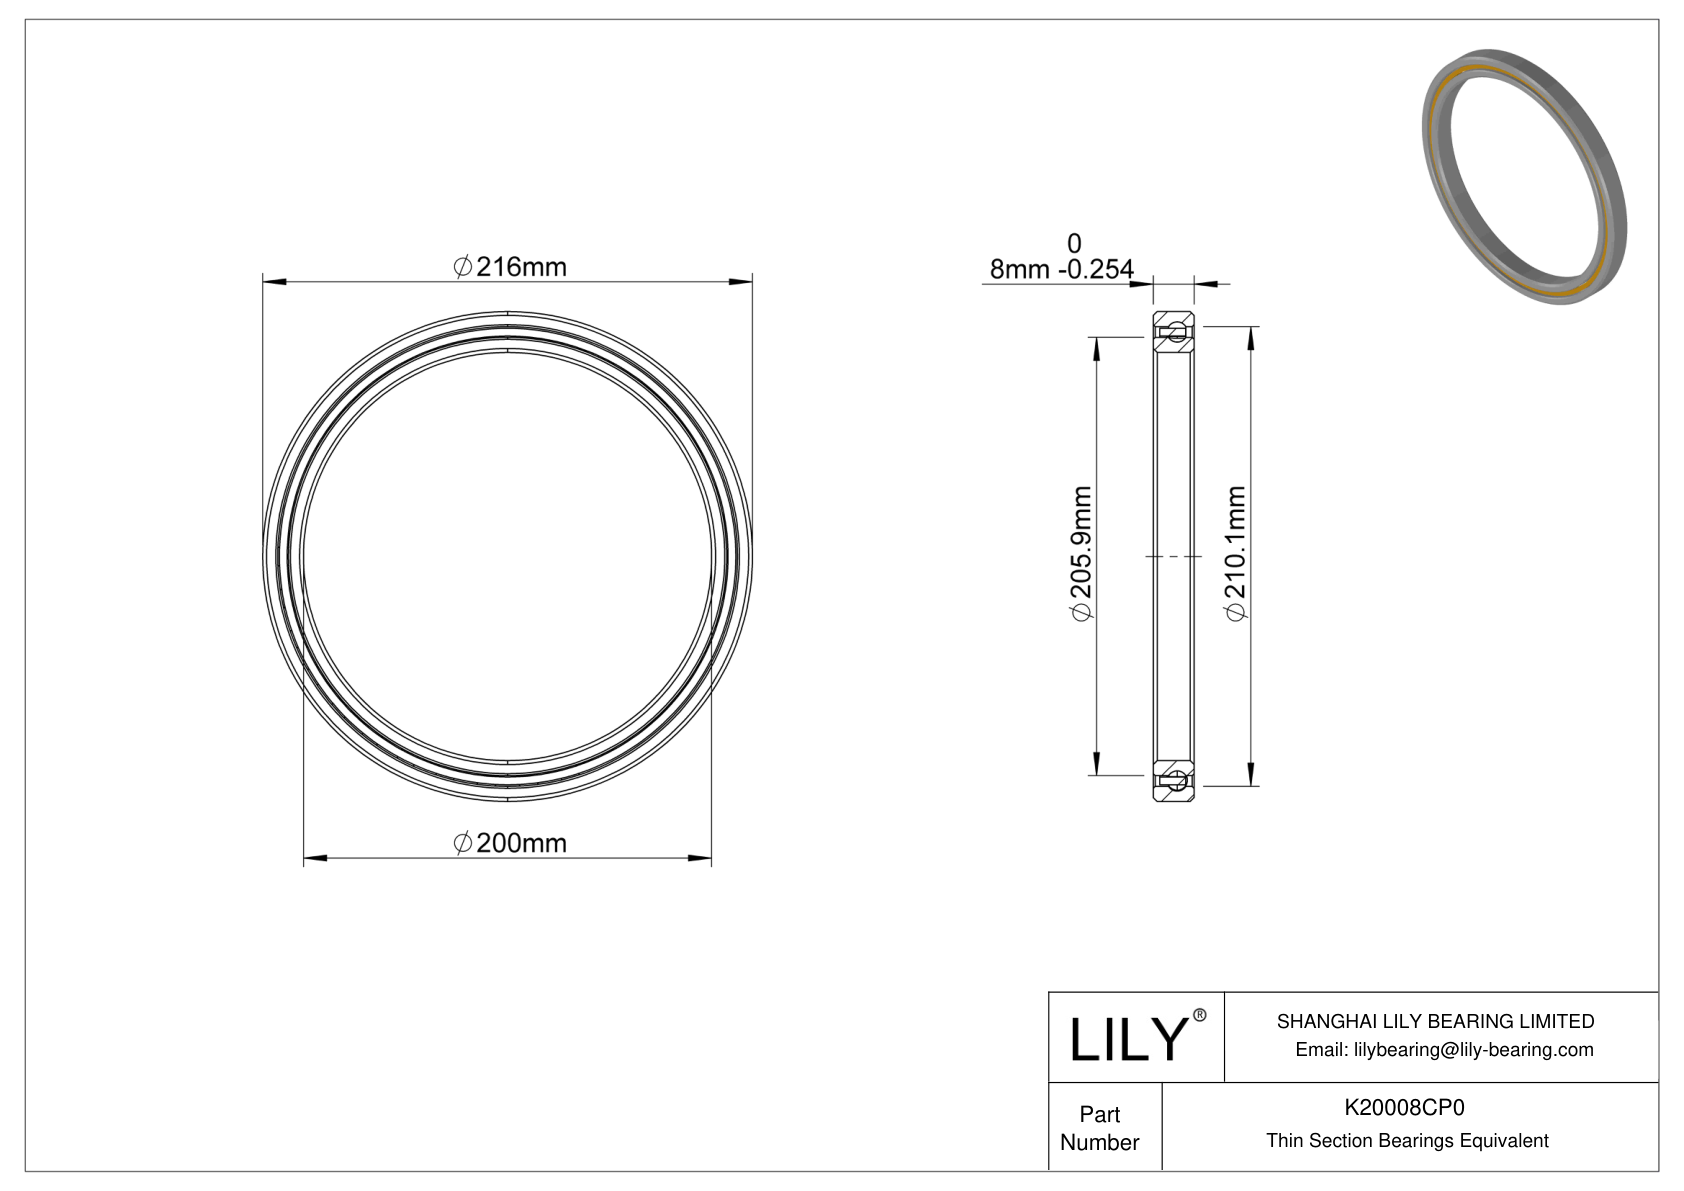 K20008CP0 Constant Section (CS) Bearings cad drawing